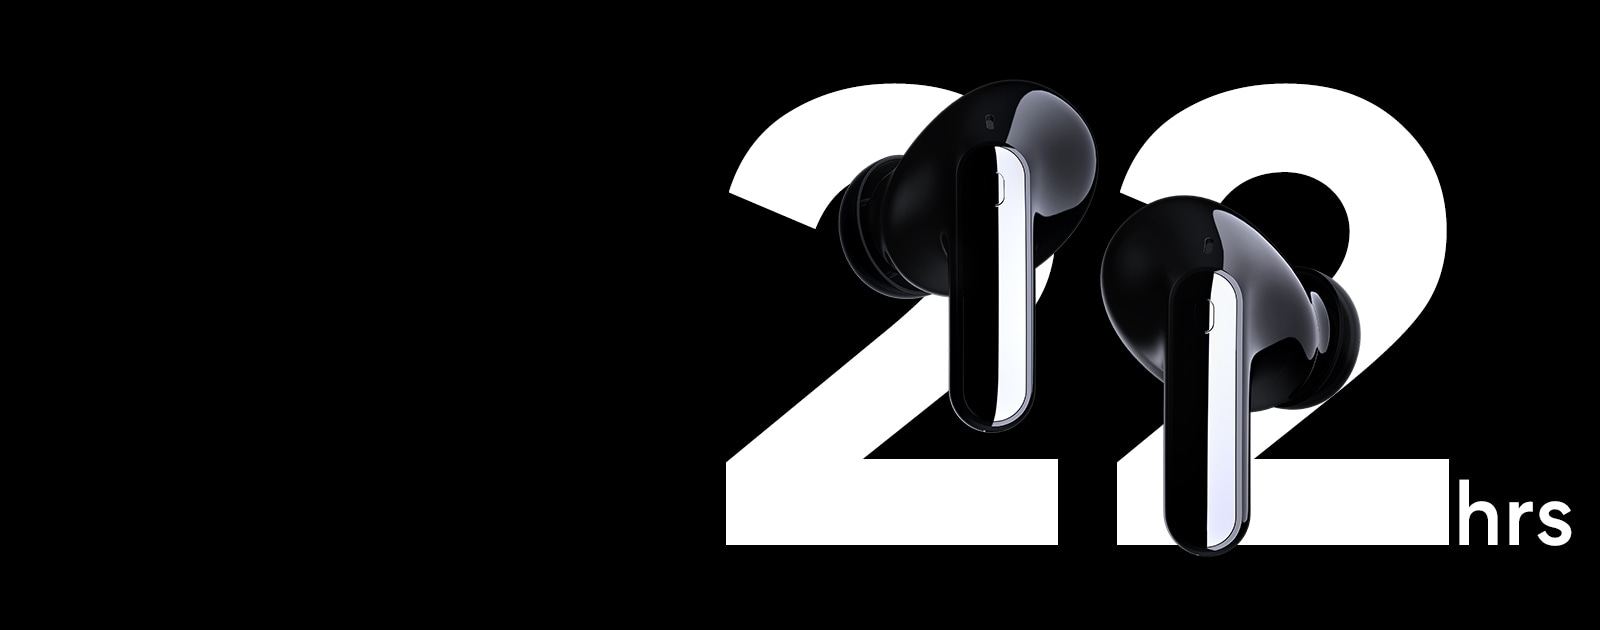 Ear buds are floating infront of text "22 hrs". 